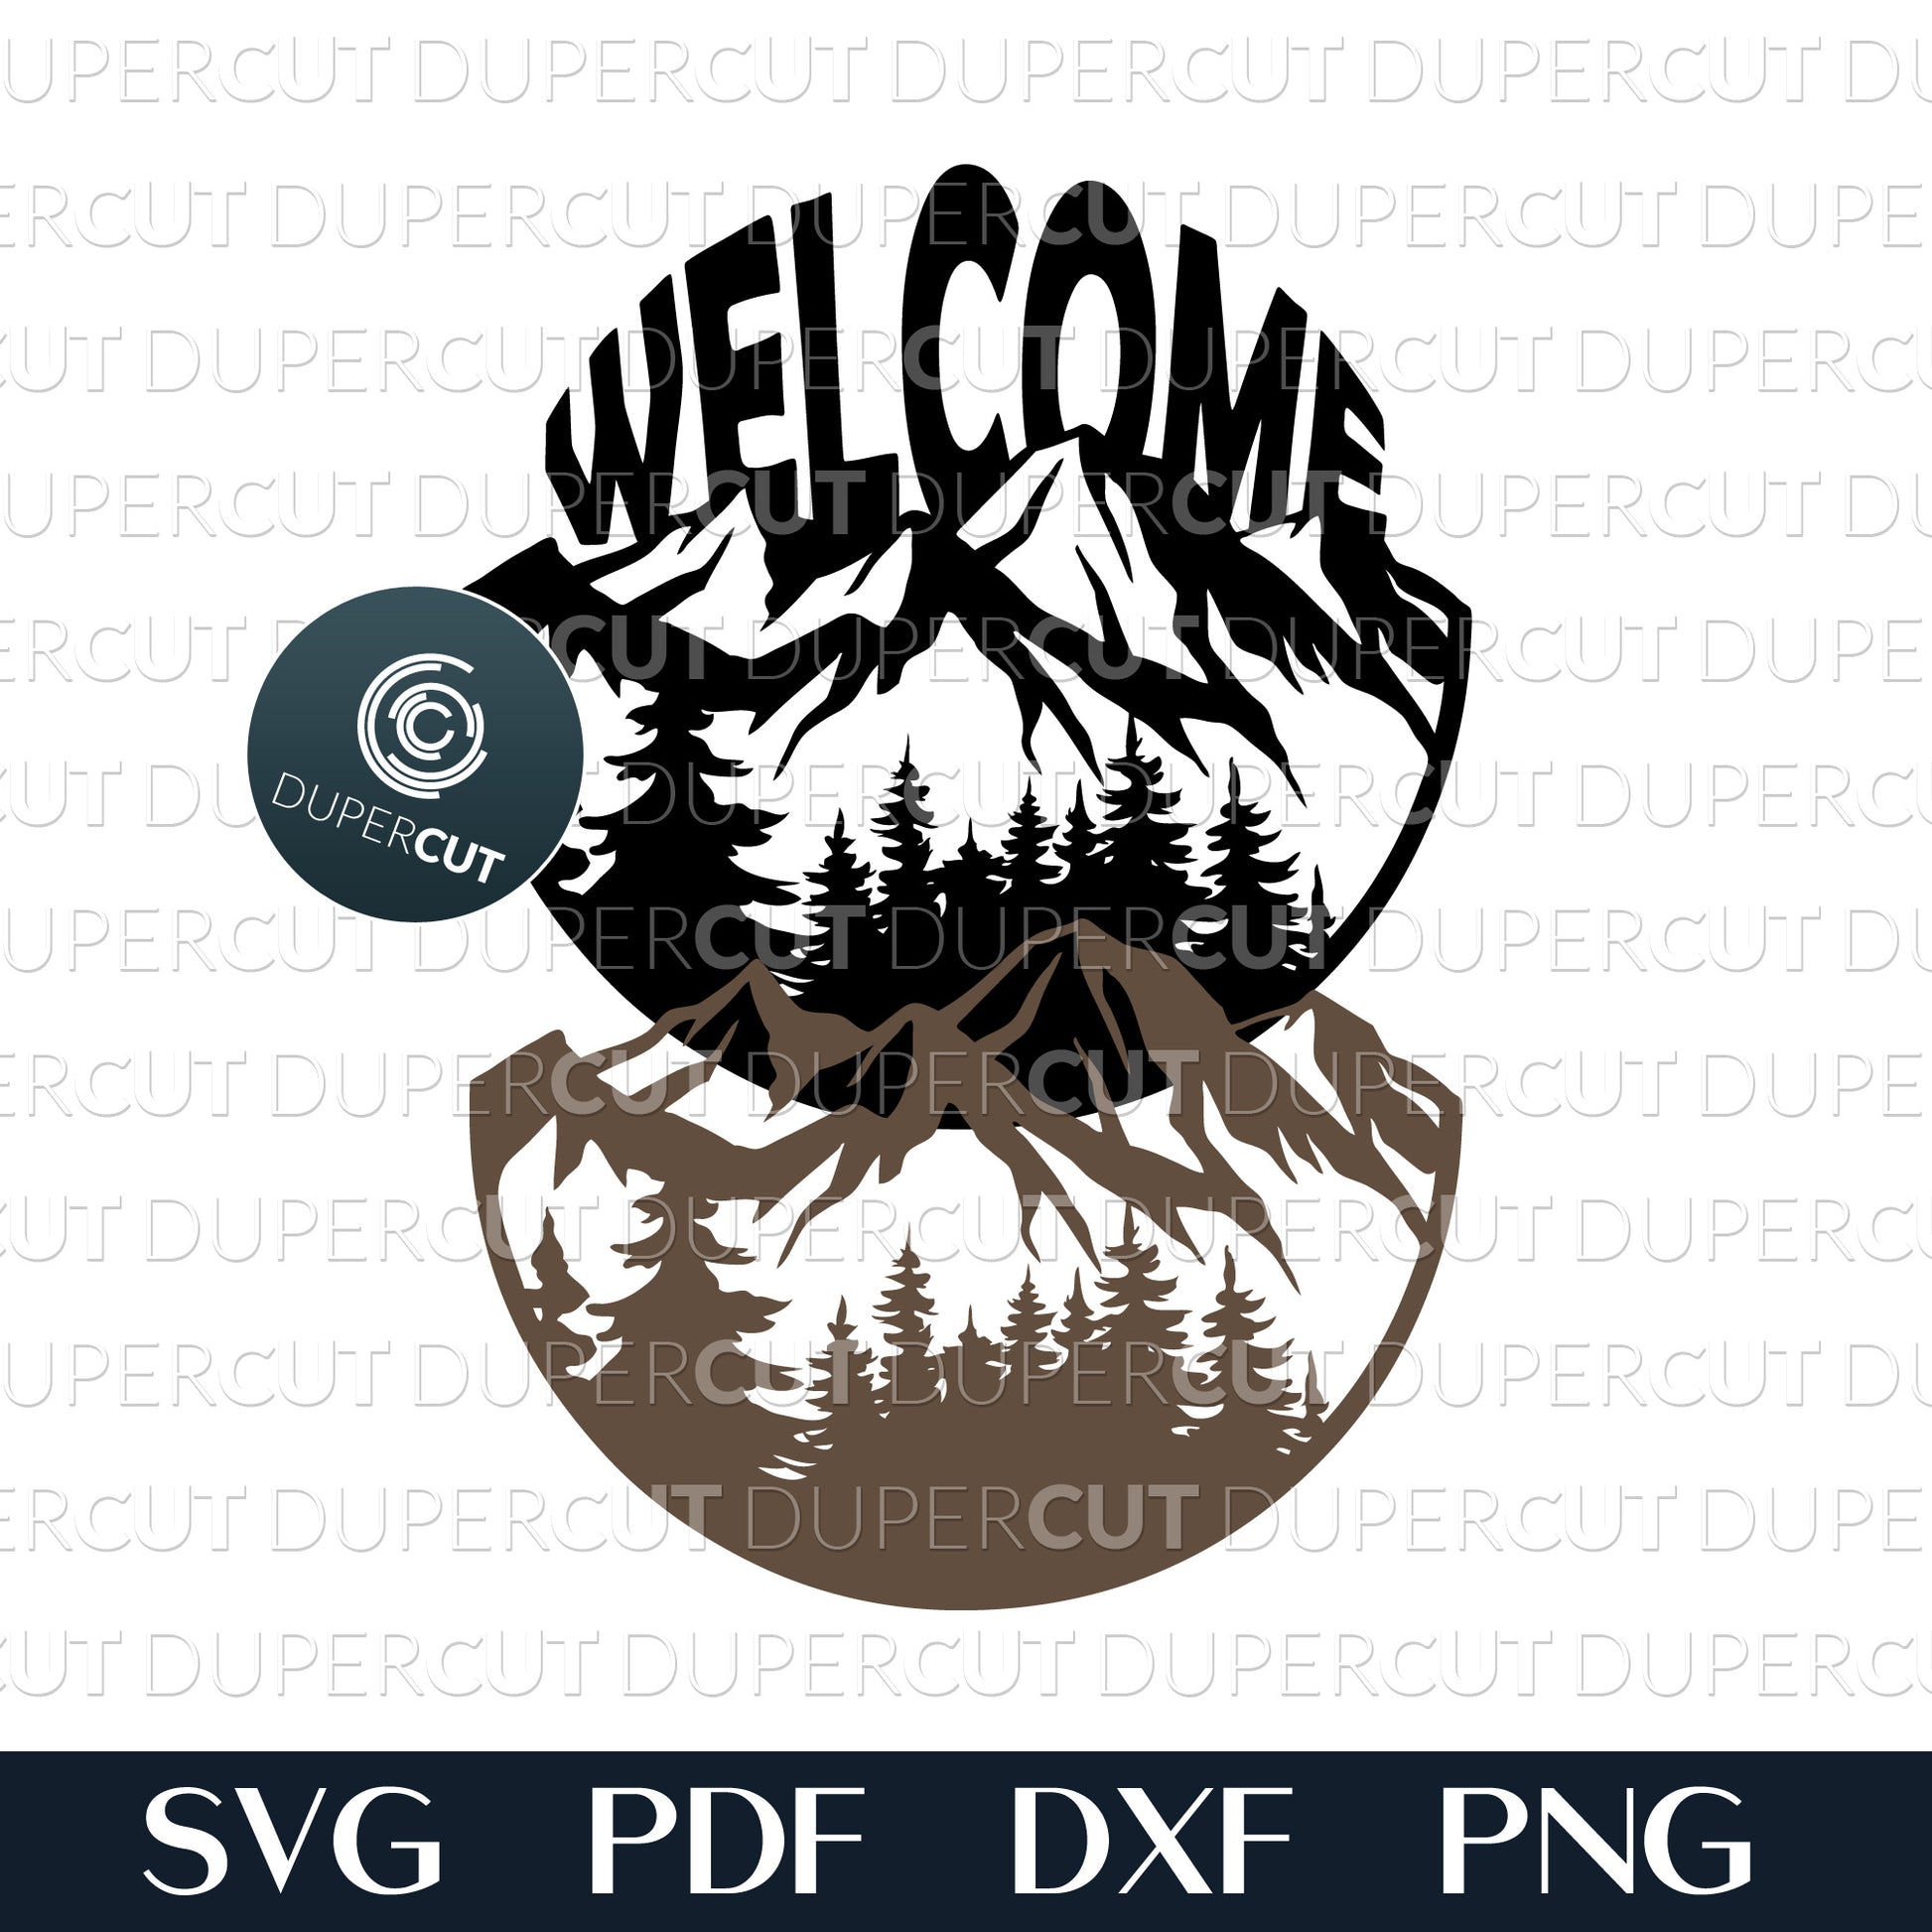 Woods scene welcome sign layered files. SVG PDF DXF cutting template for laser cutting, engraving, Glowforge, Cricut, Silhouette, CNC plasma